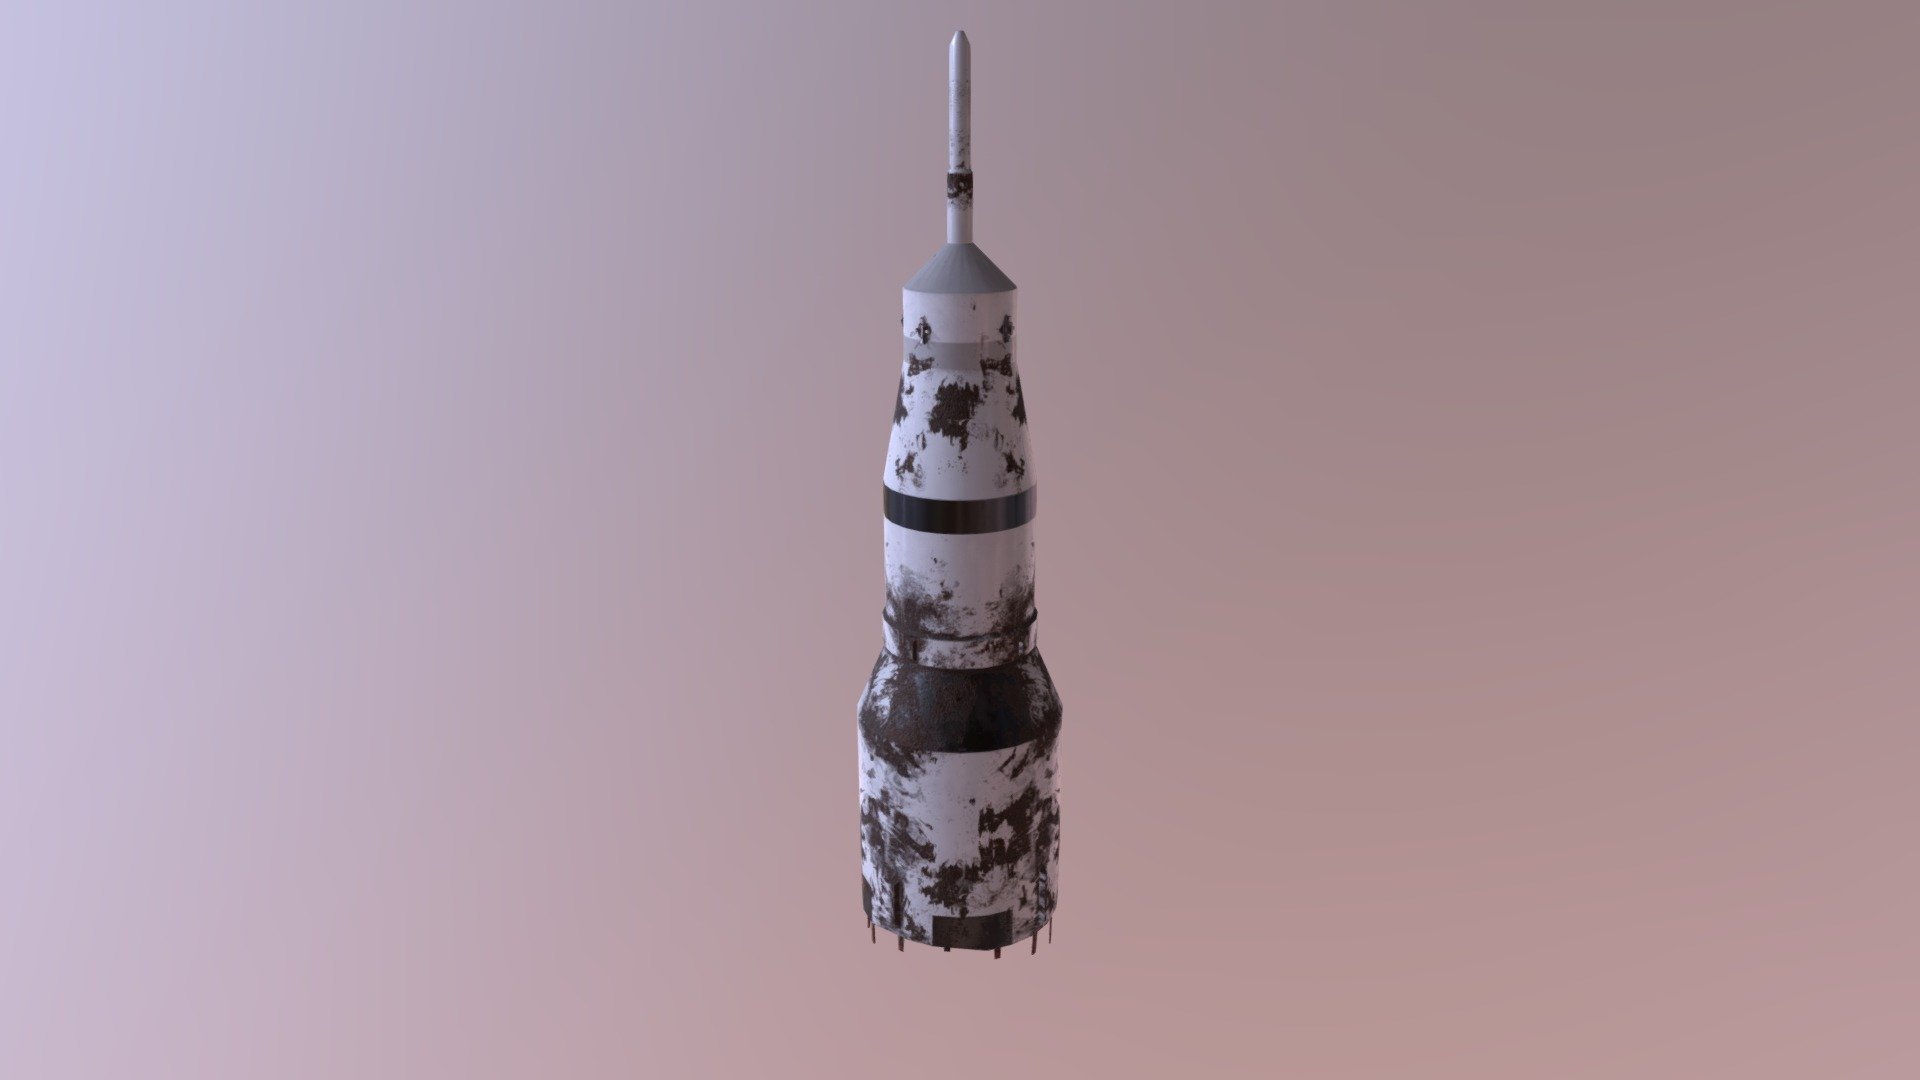 In this version of Earth, the saturn V was made as an attempt to reach the Destination of a mighty pilgrimage, however when it failt it was tossed into the sea, left to corrode in the water 3d model